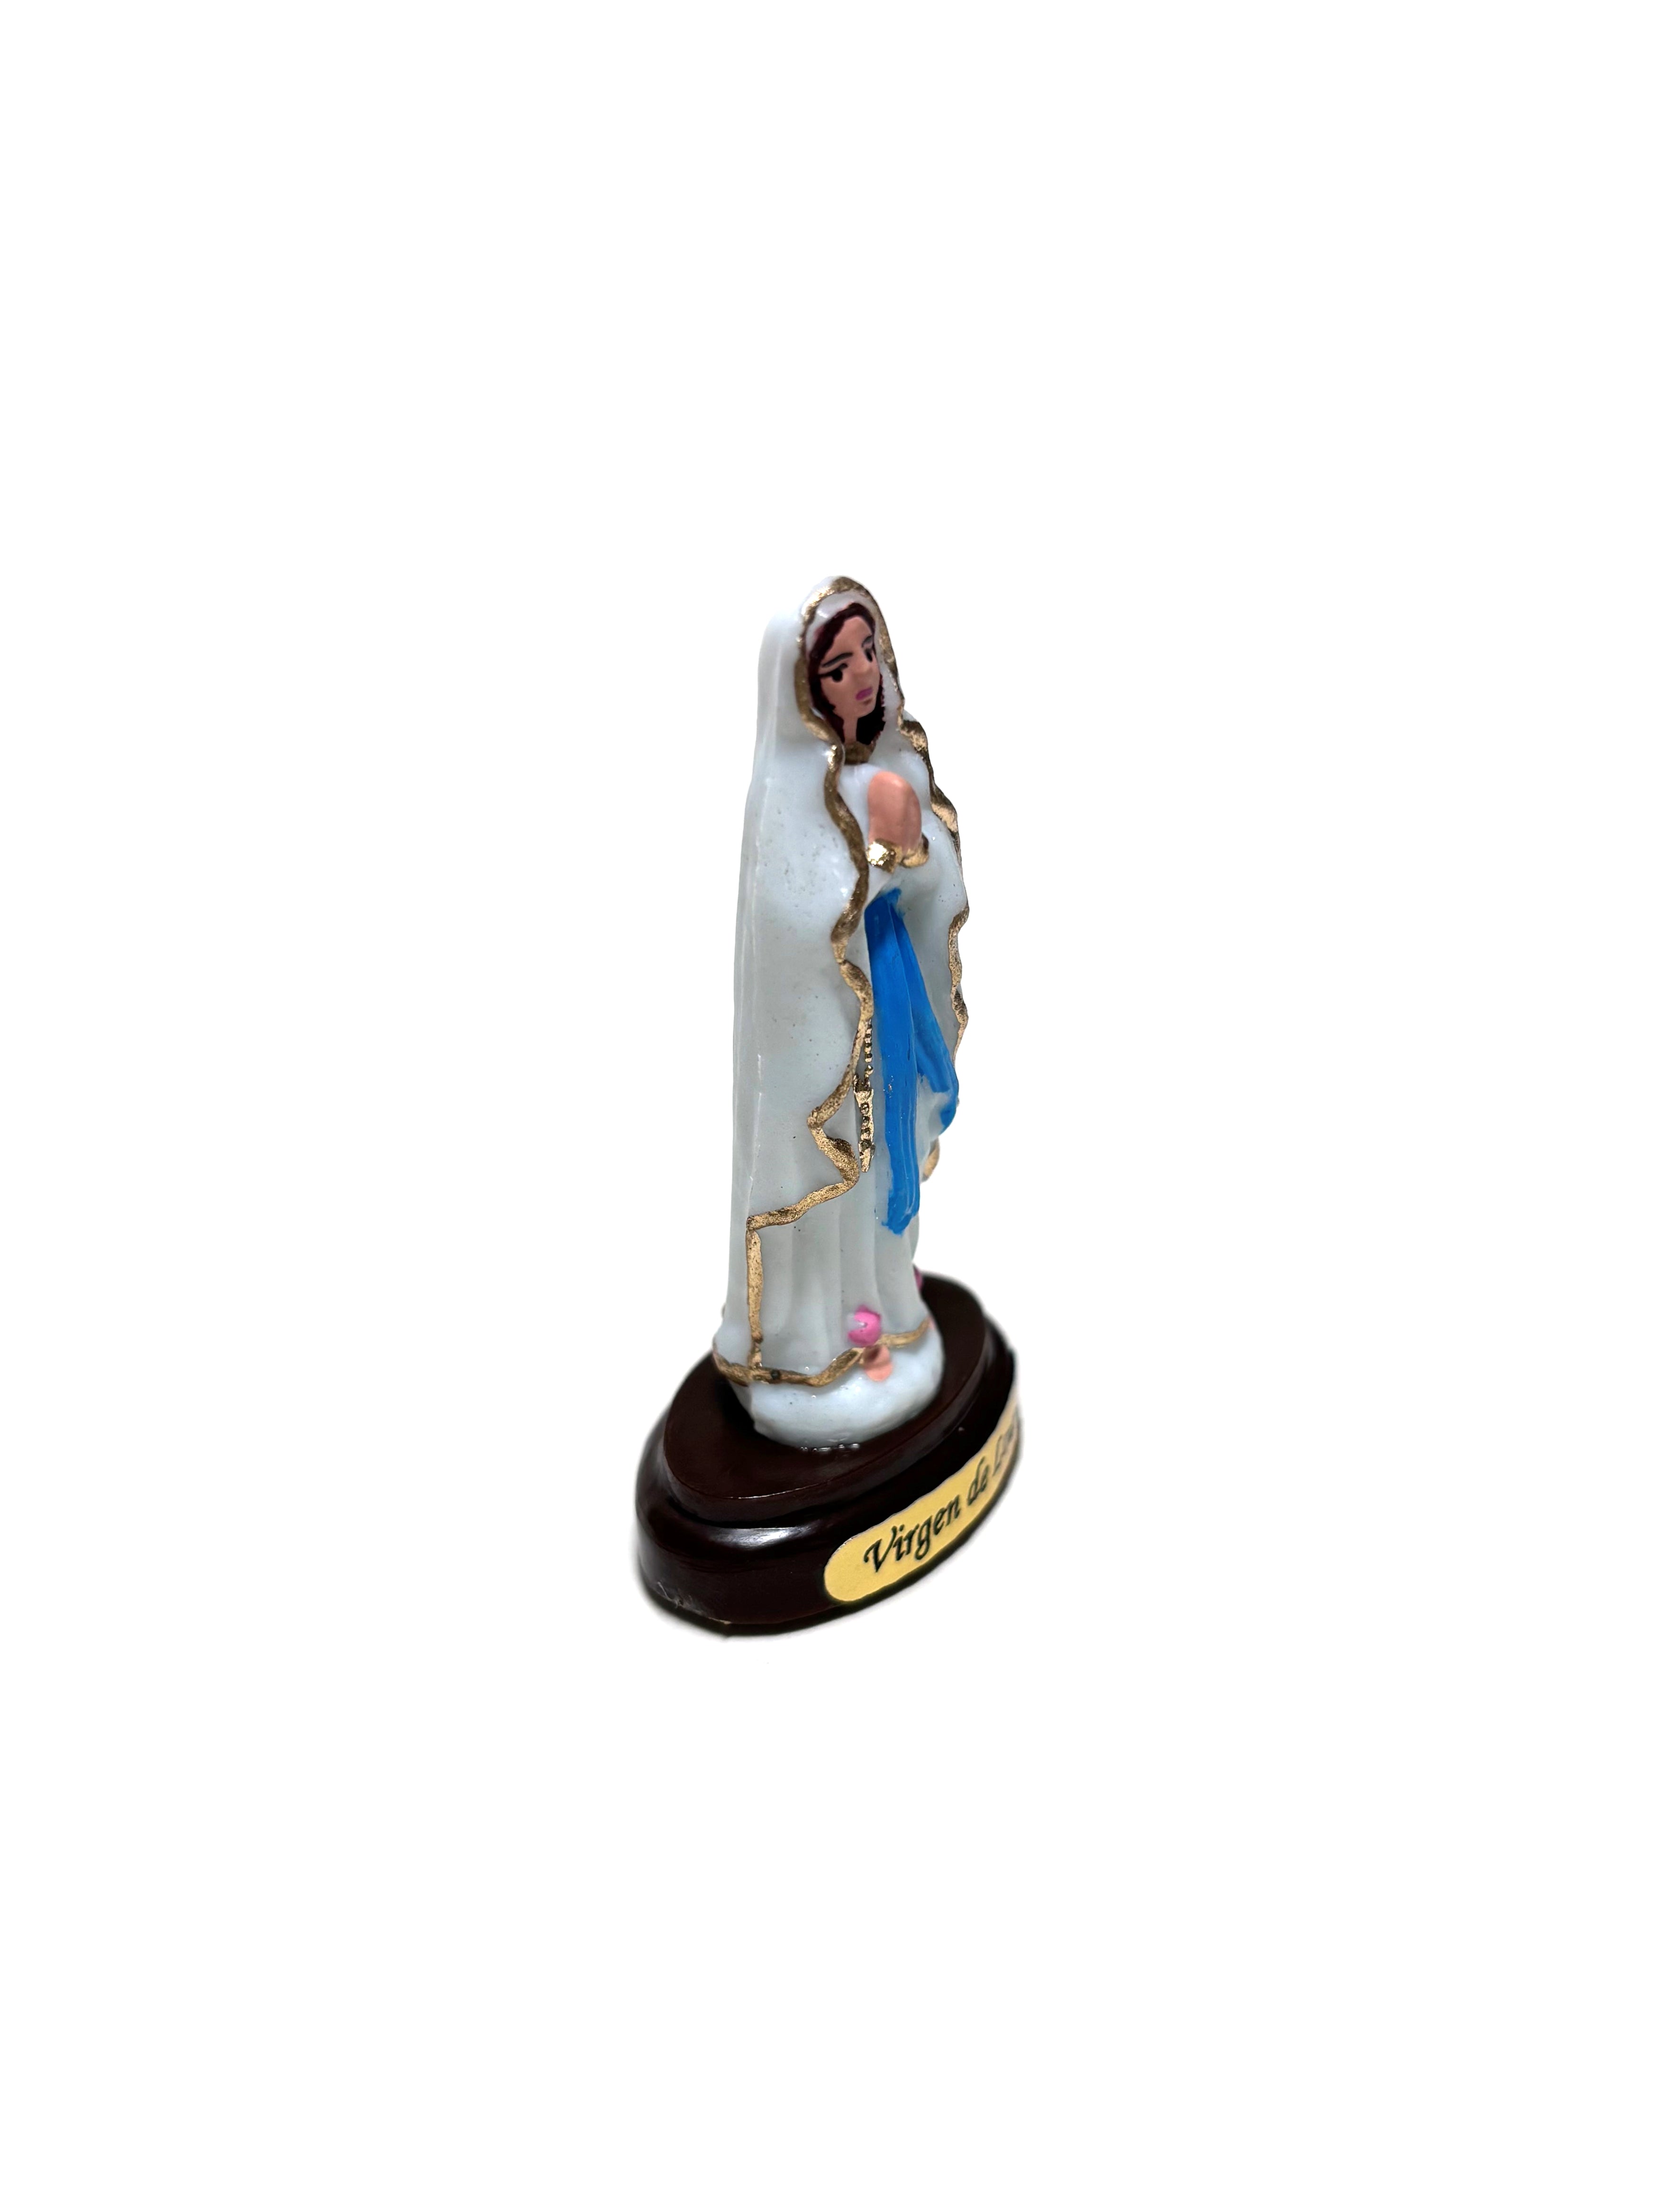 Religious statue of Our Lady of Lourdes 2.5" height